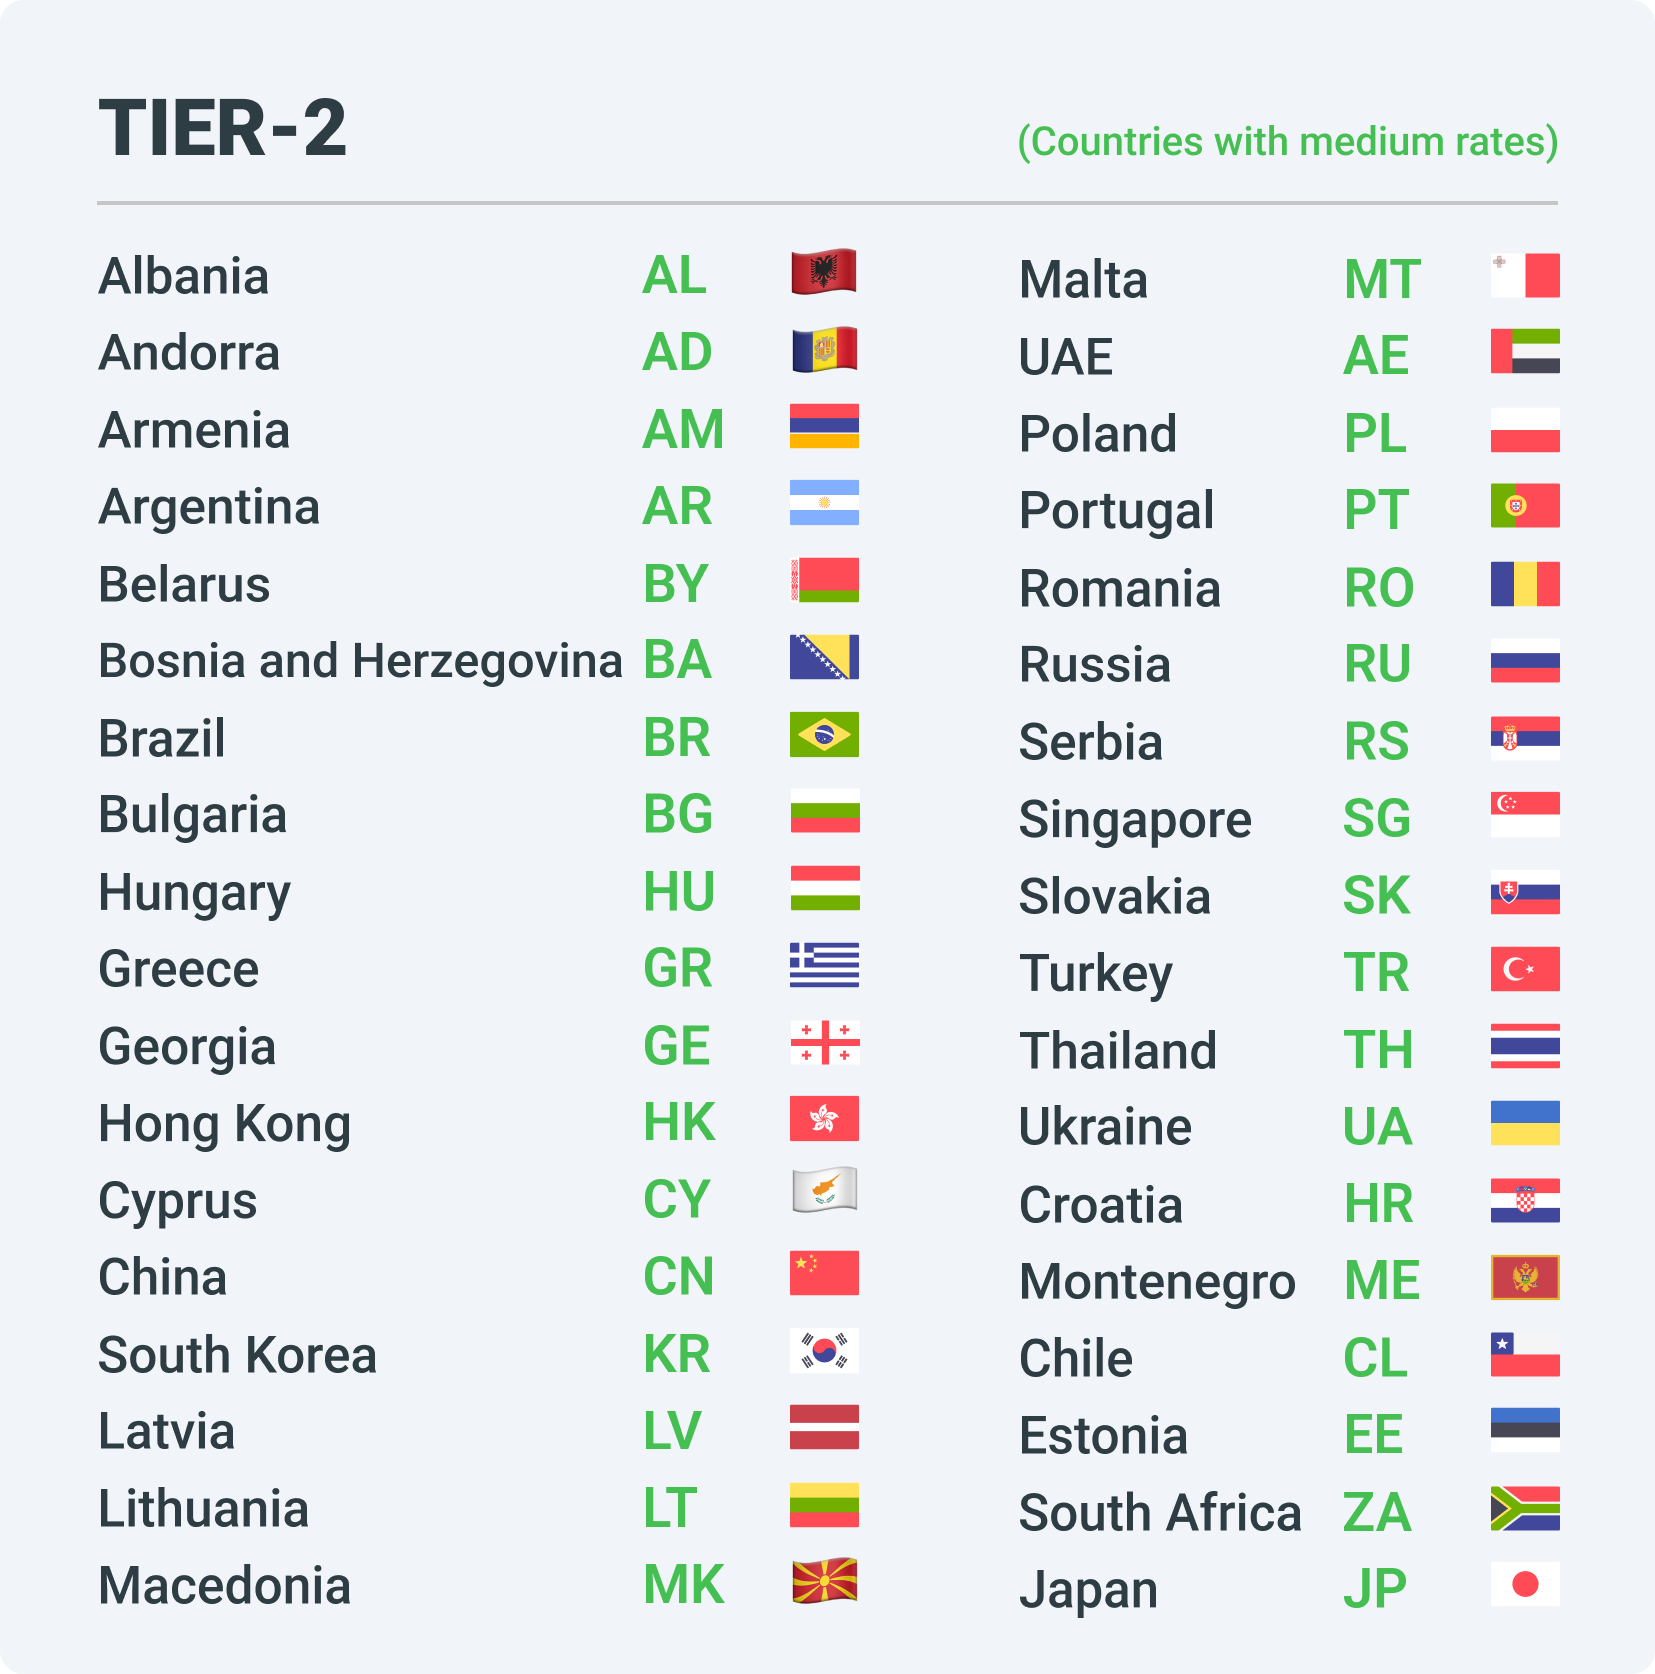 Tier 2 countries